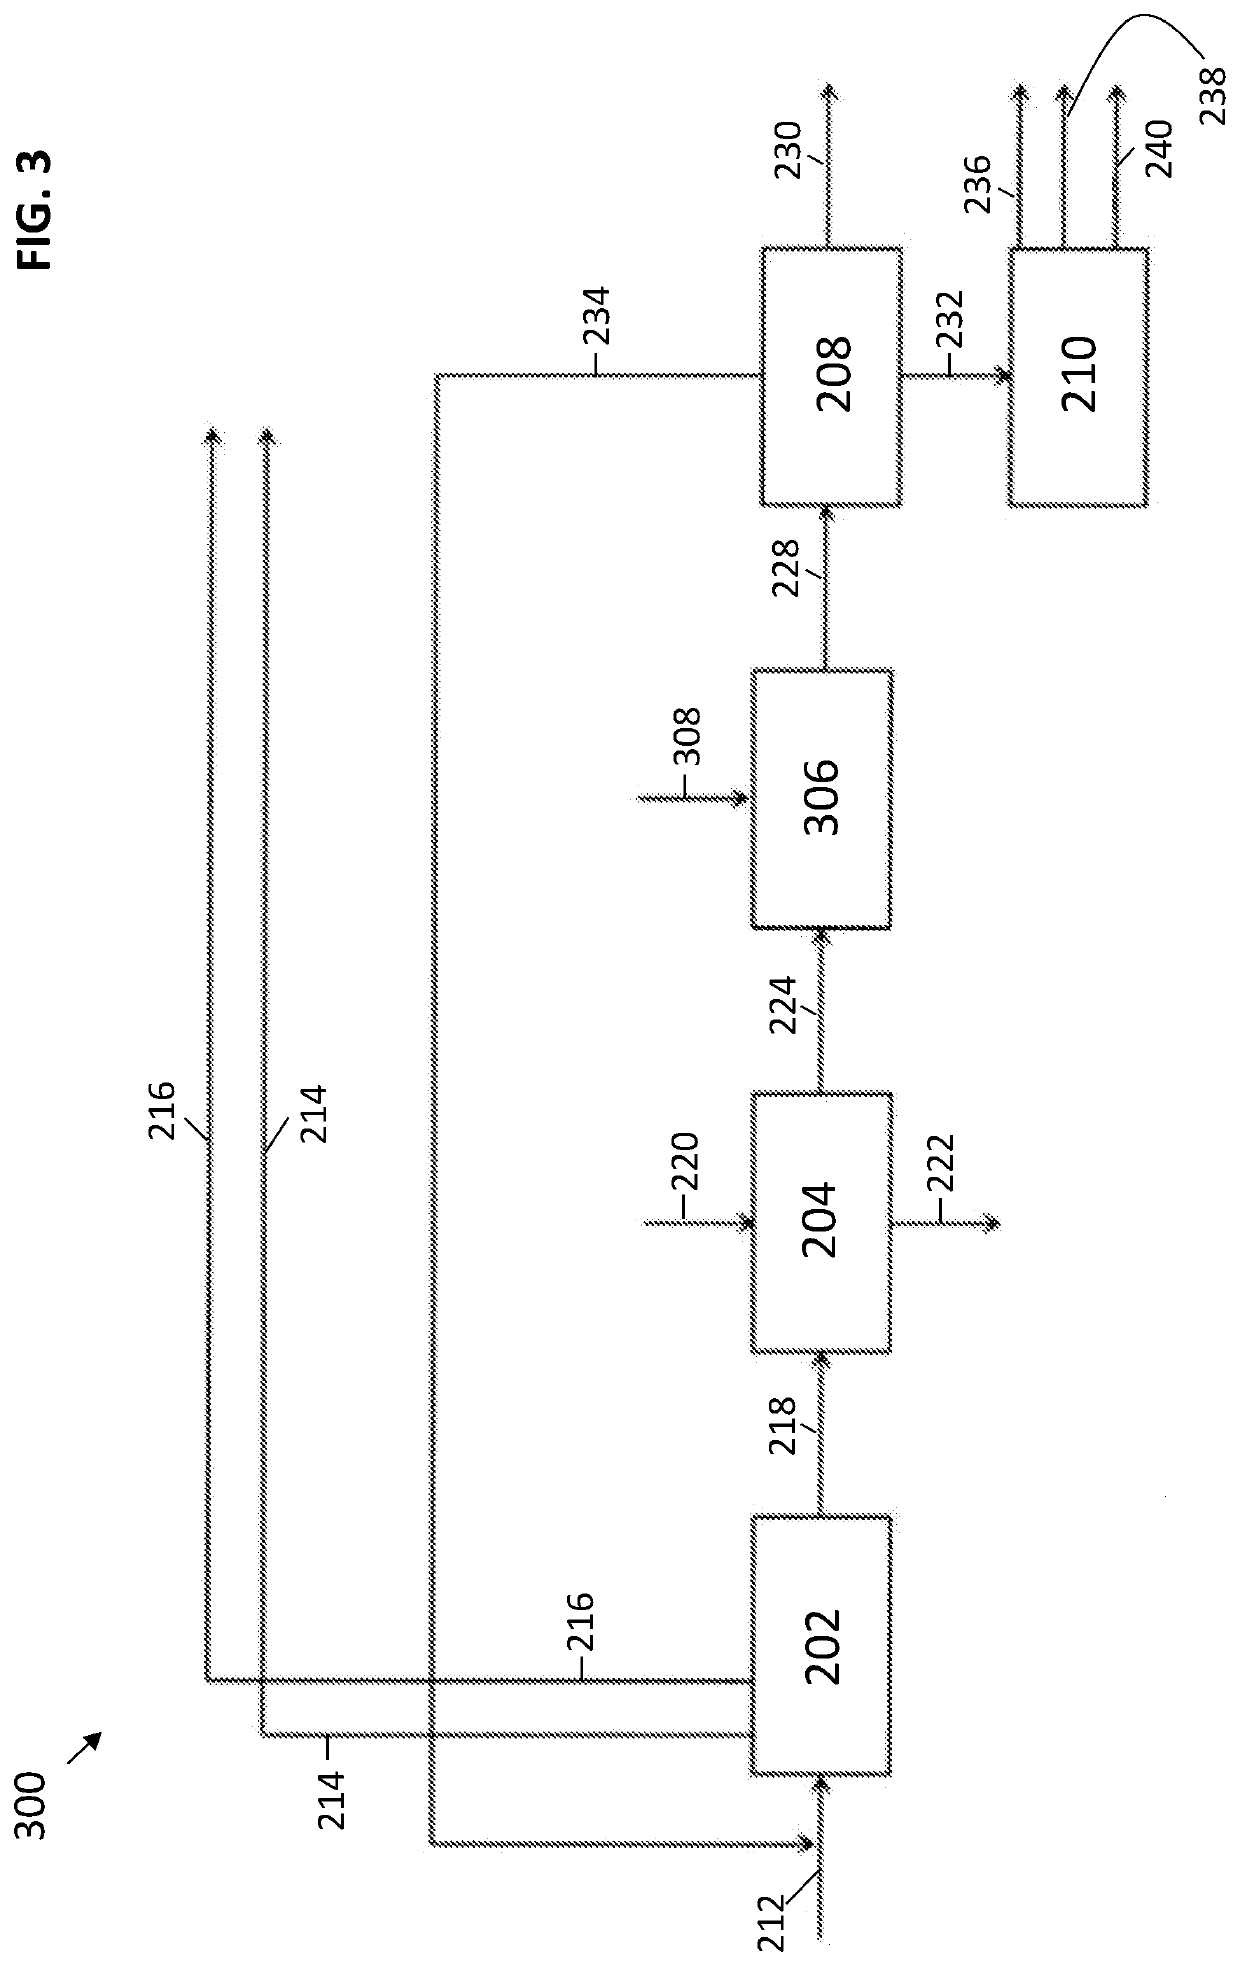 Integrated process for the production of isononanol and gasoline and diesel blending components